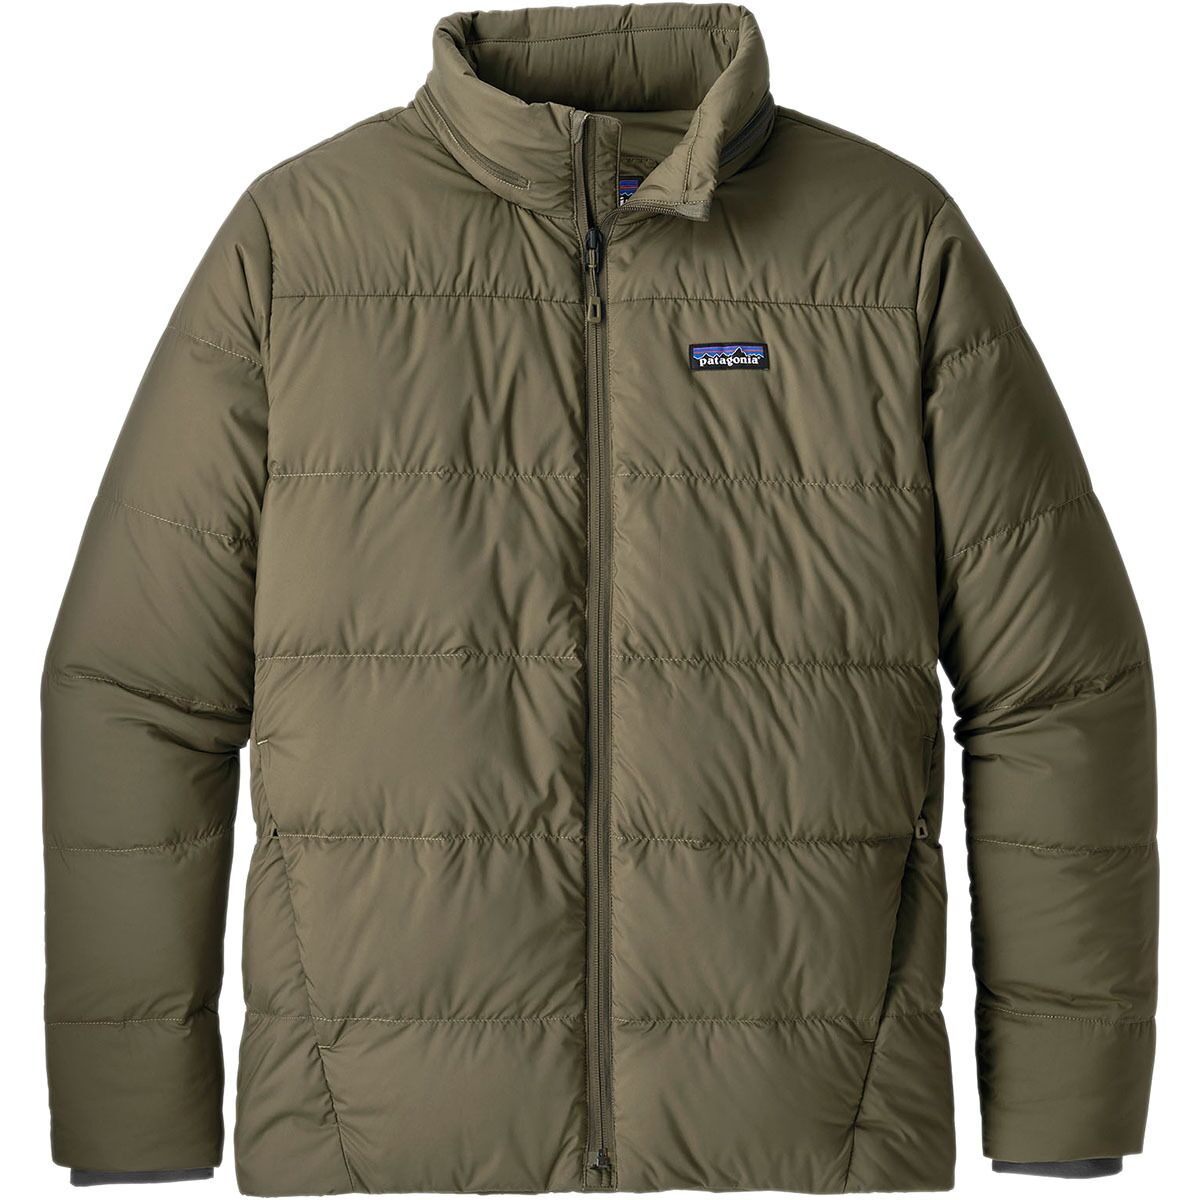 Silent Down Insulated Jacket - Men